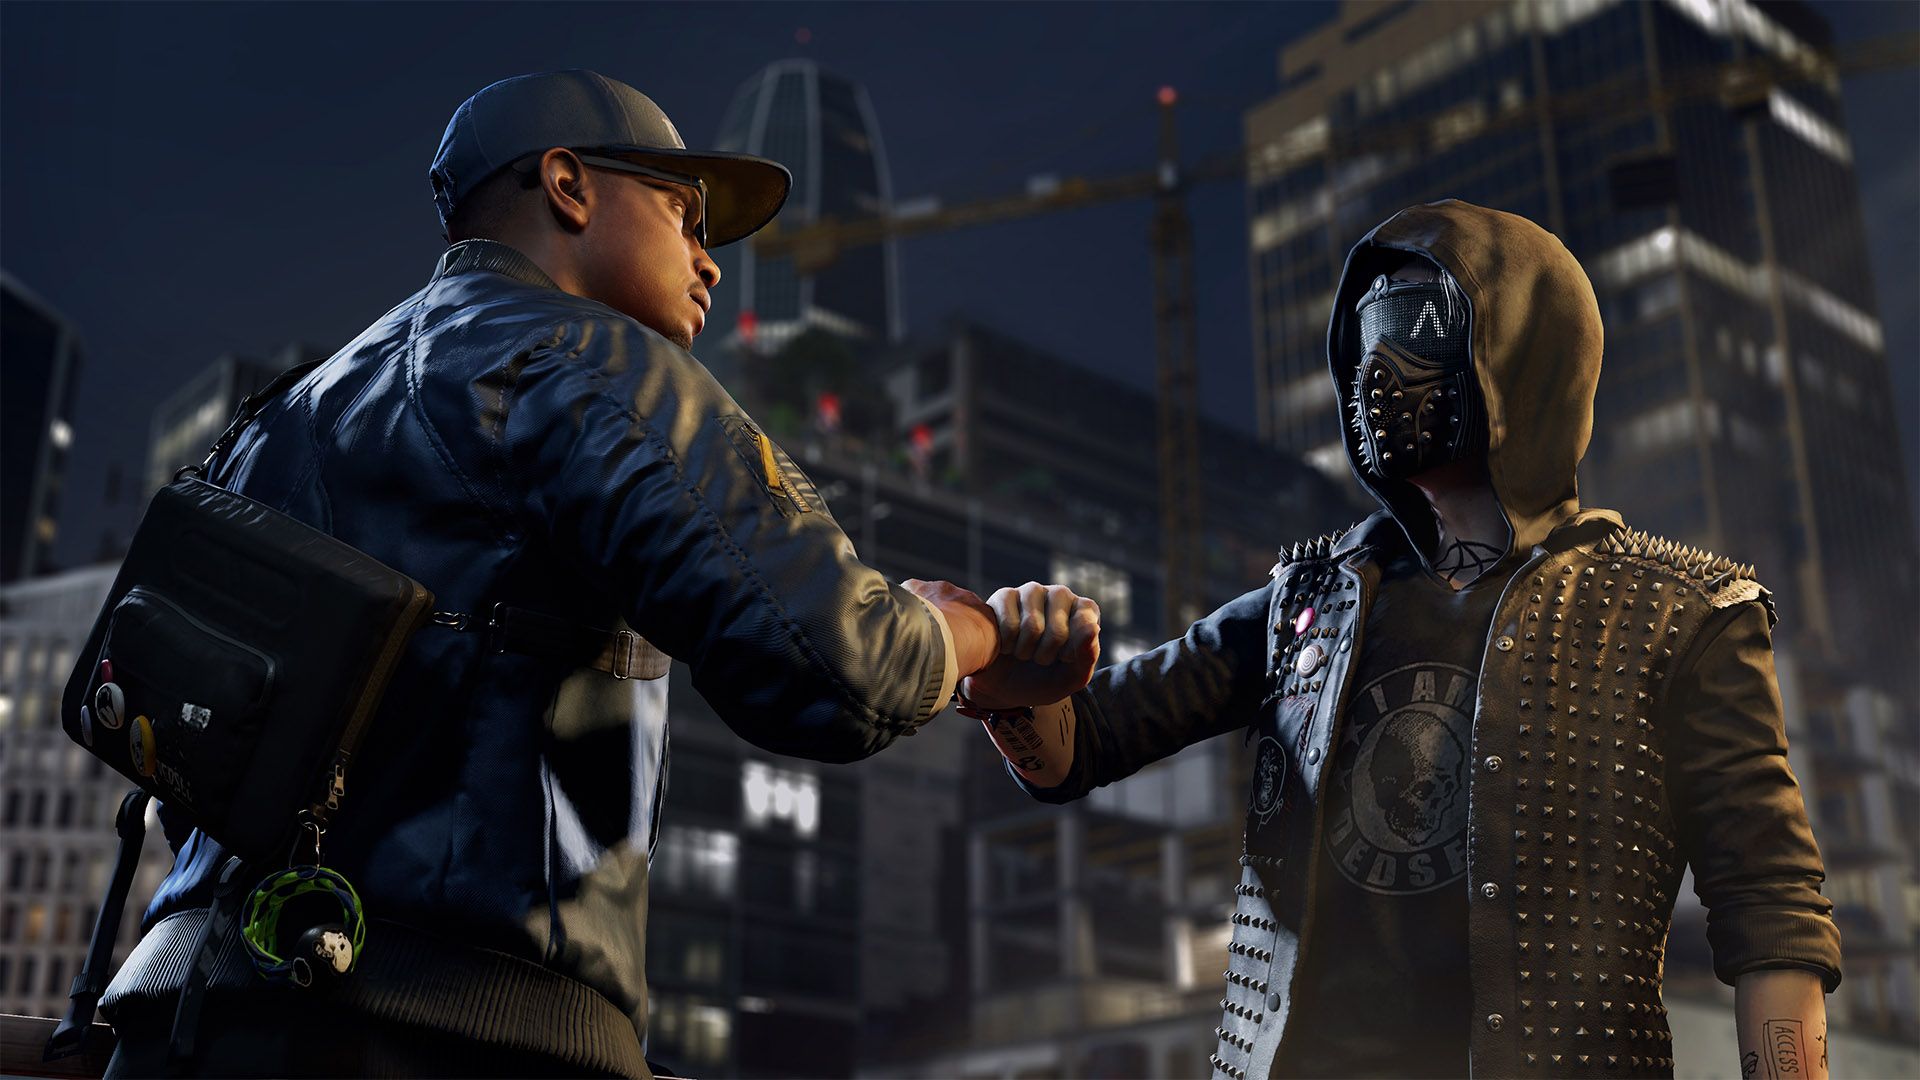 Watch Dogs 2 Uncensored licking cartoons